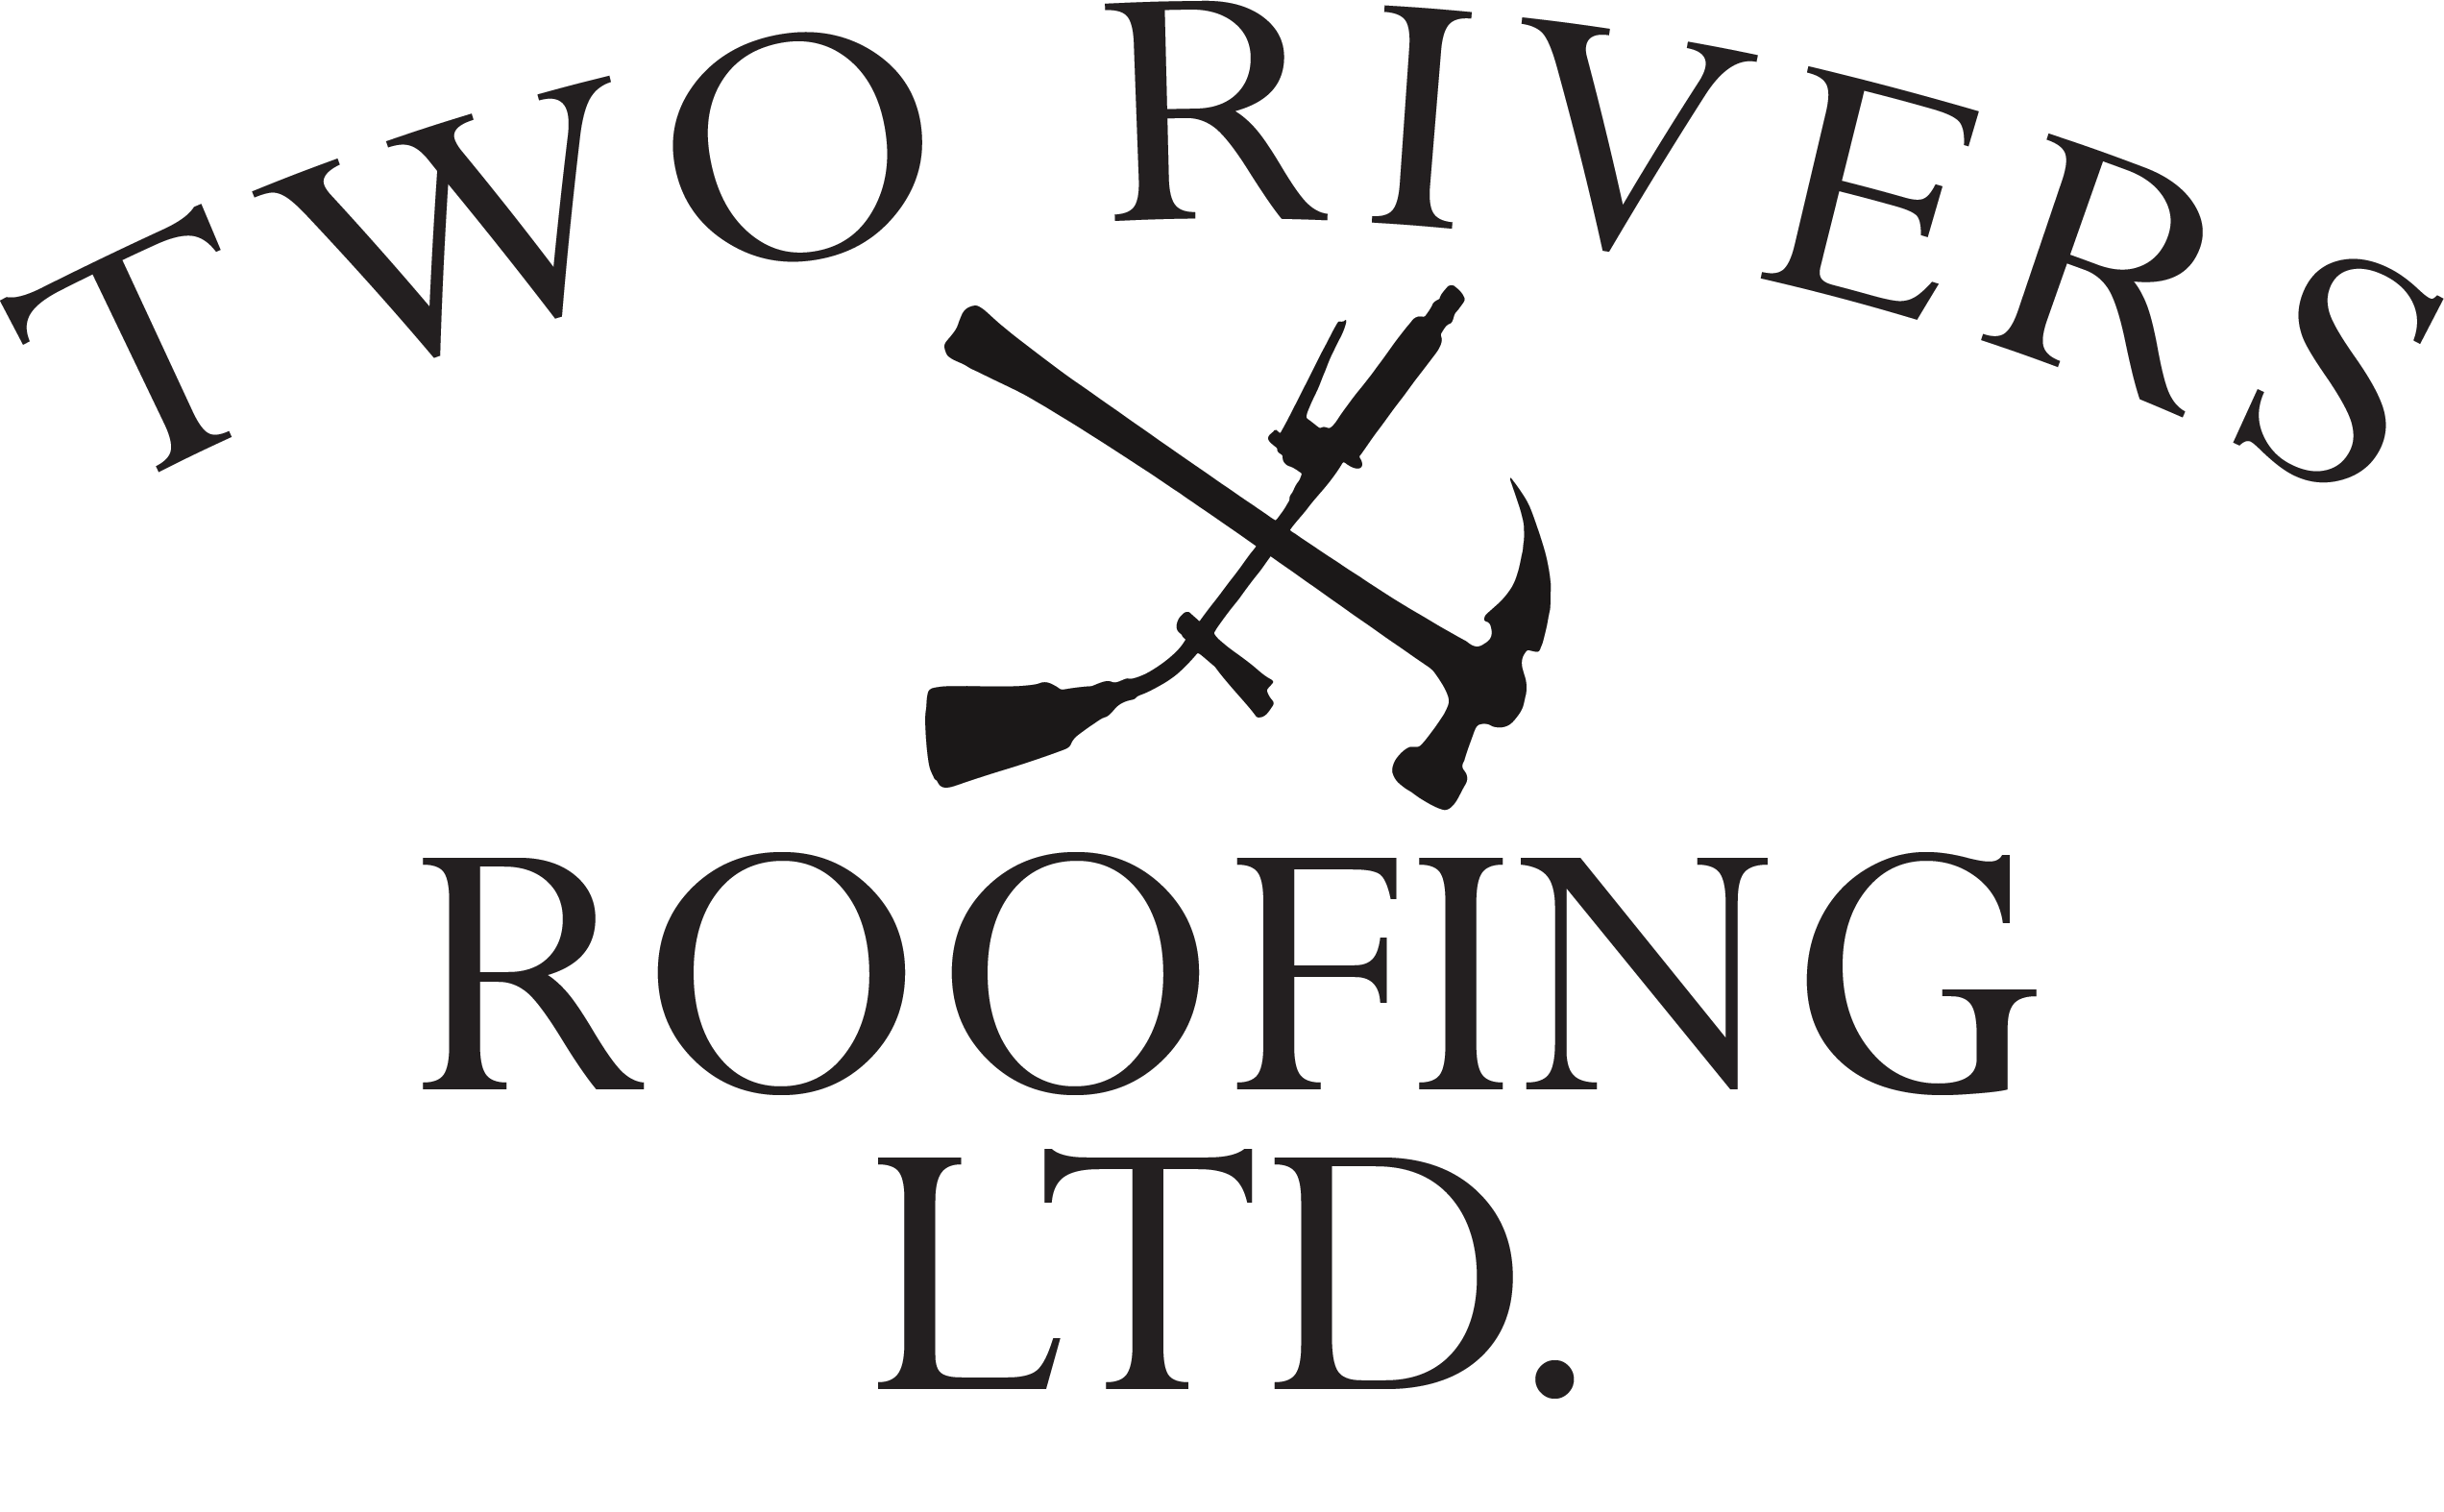 Two Rivers Roofing Ltd.